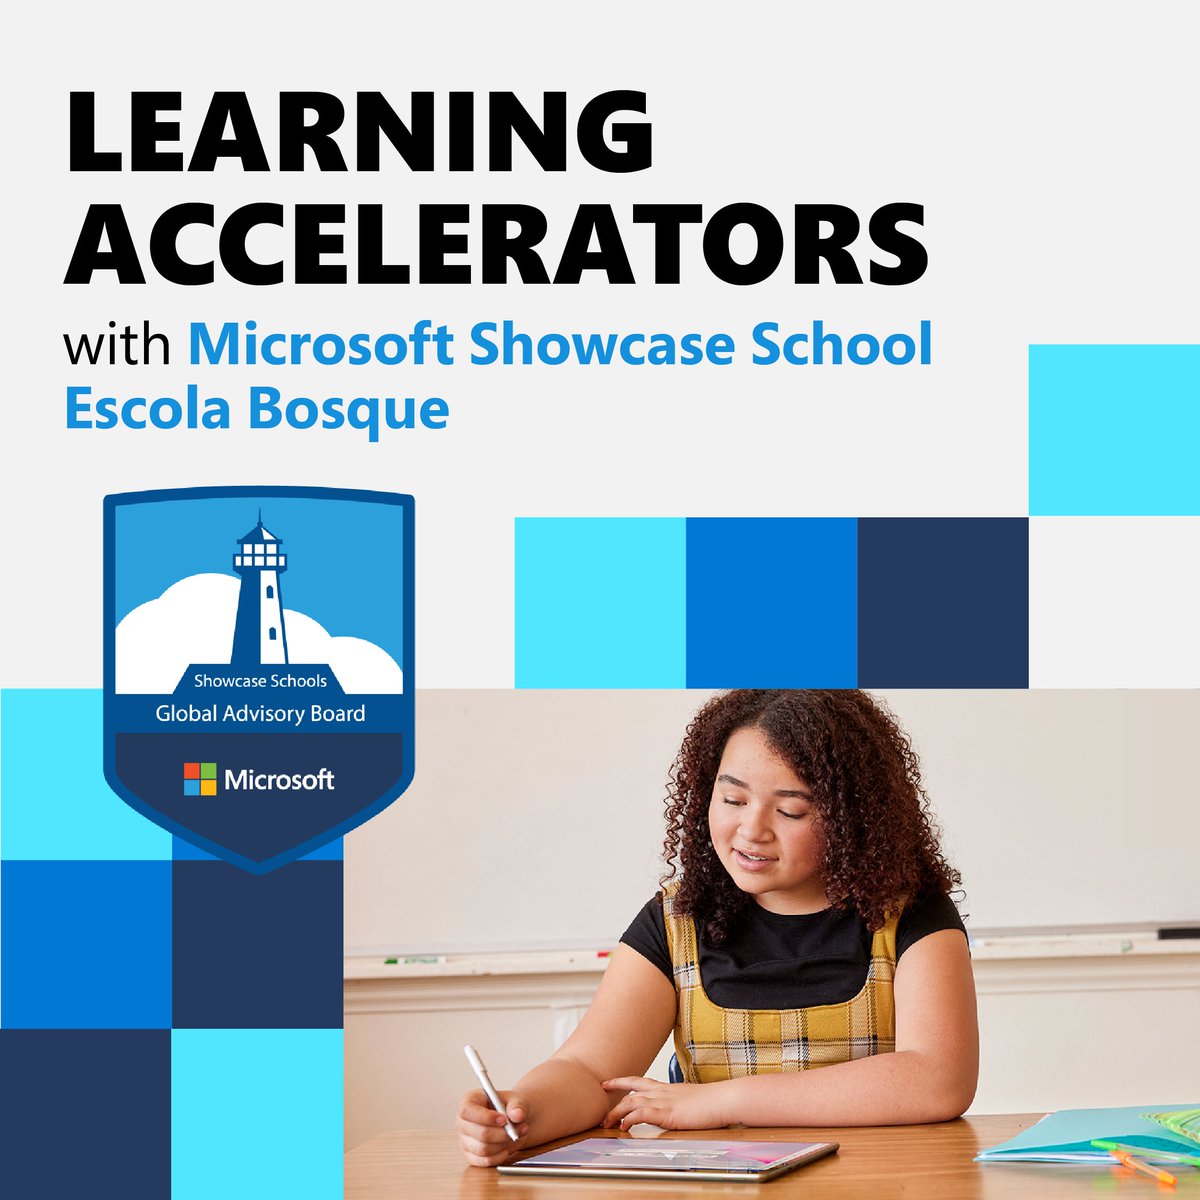 Microsoft Showcase School Escola Bosque in São Paulo, Brazil is using Learning Accelerators from #MicrosoftEDU to support students and boost learning. Read more about their success and find inspiration for your classroom. msft.it/60129pXbC